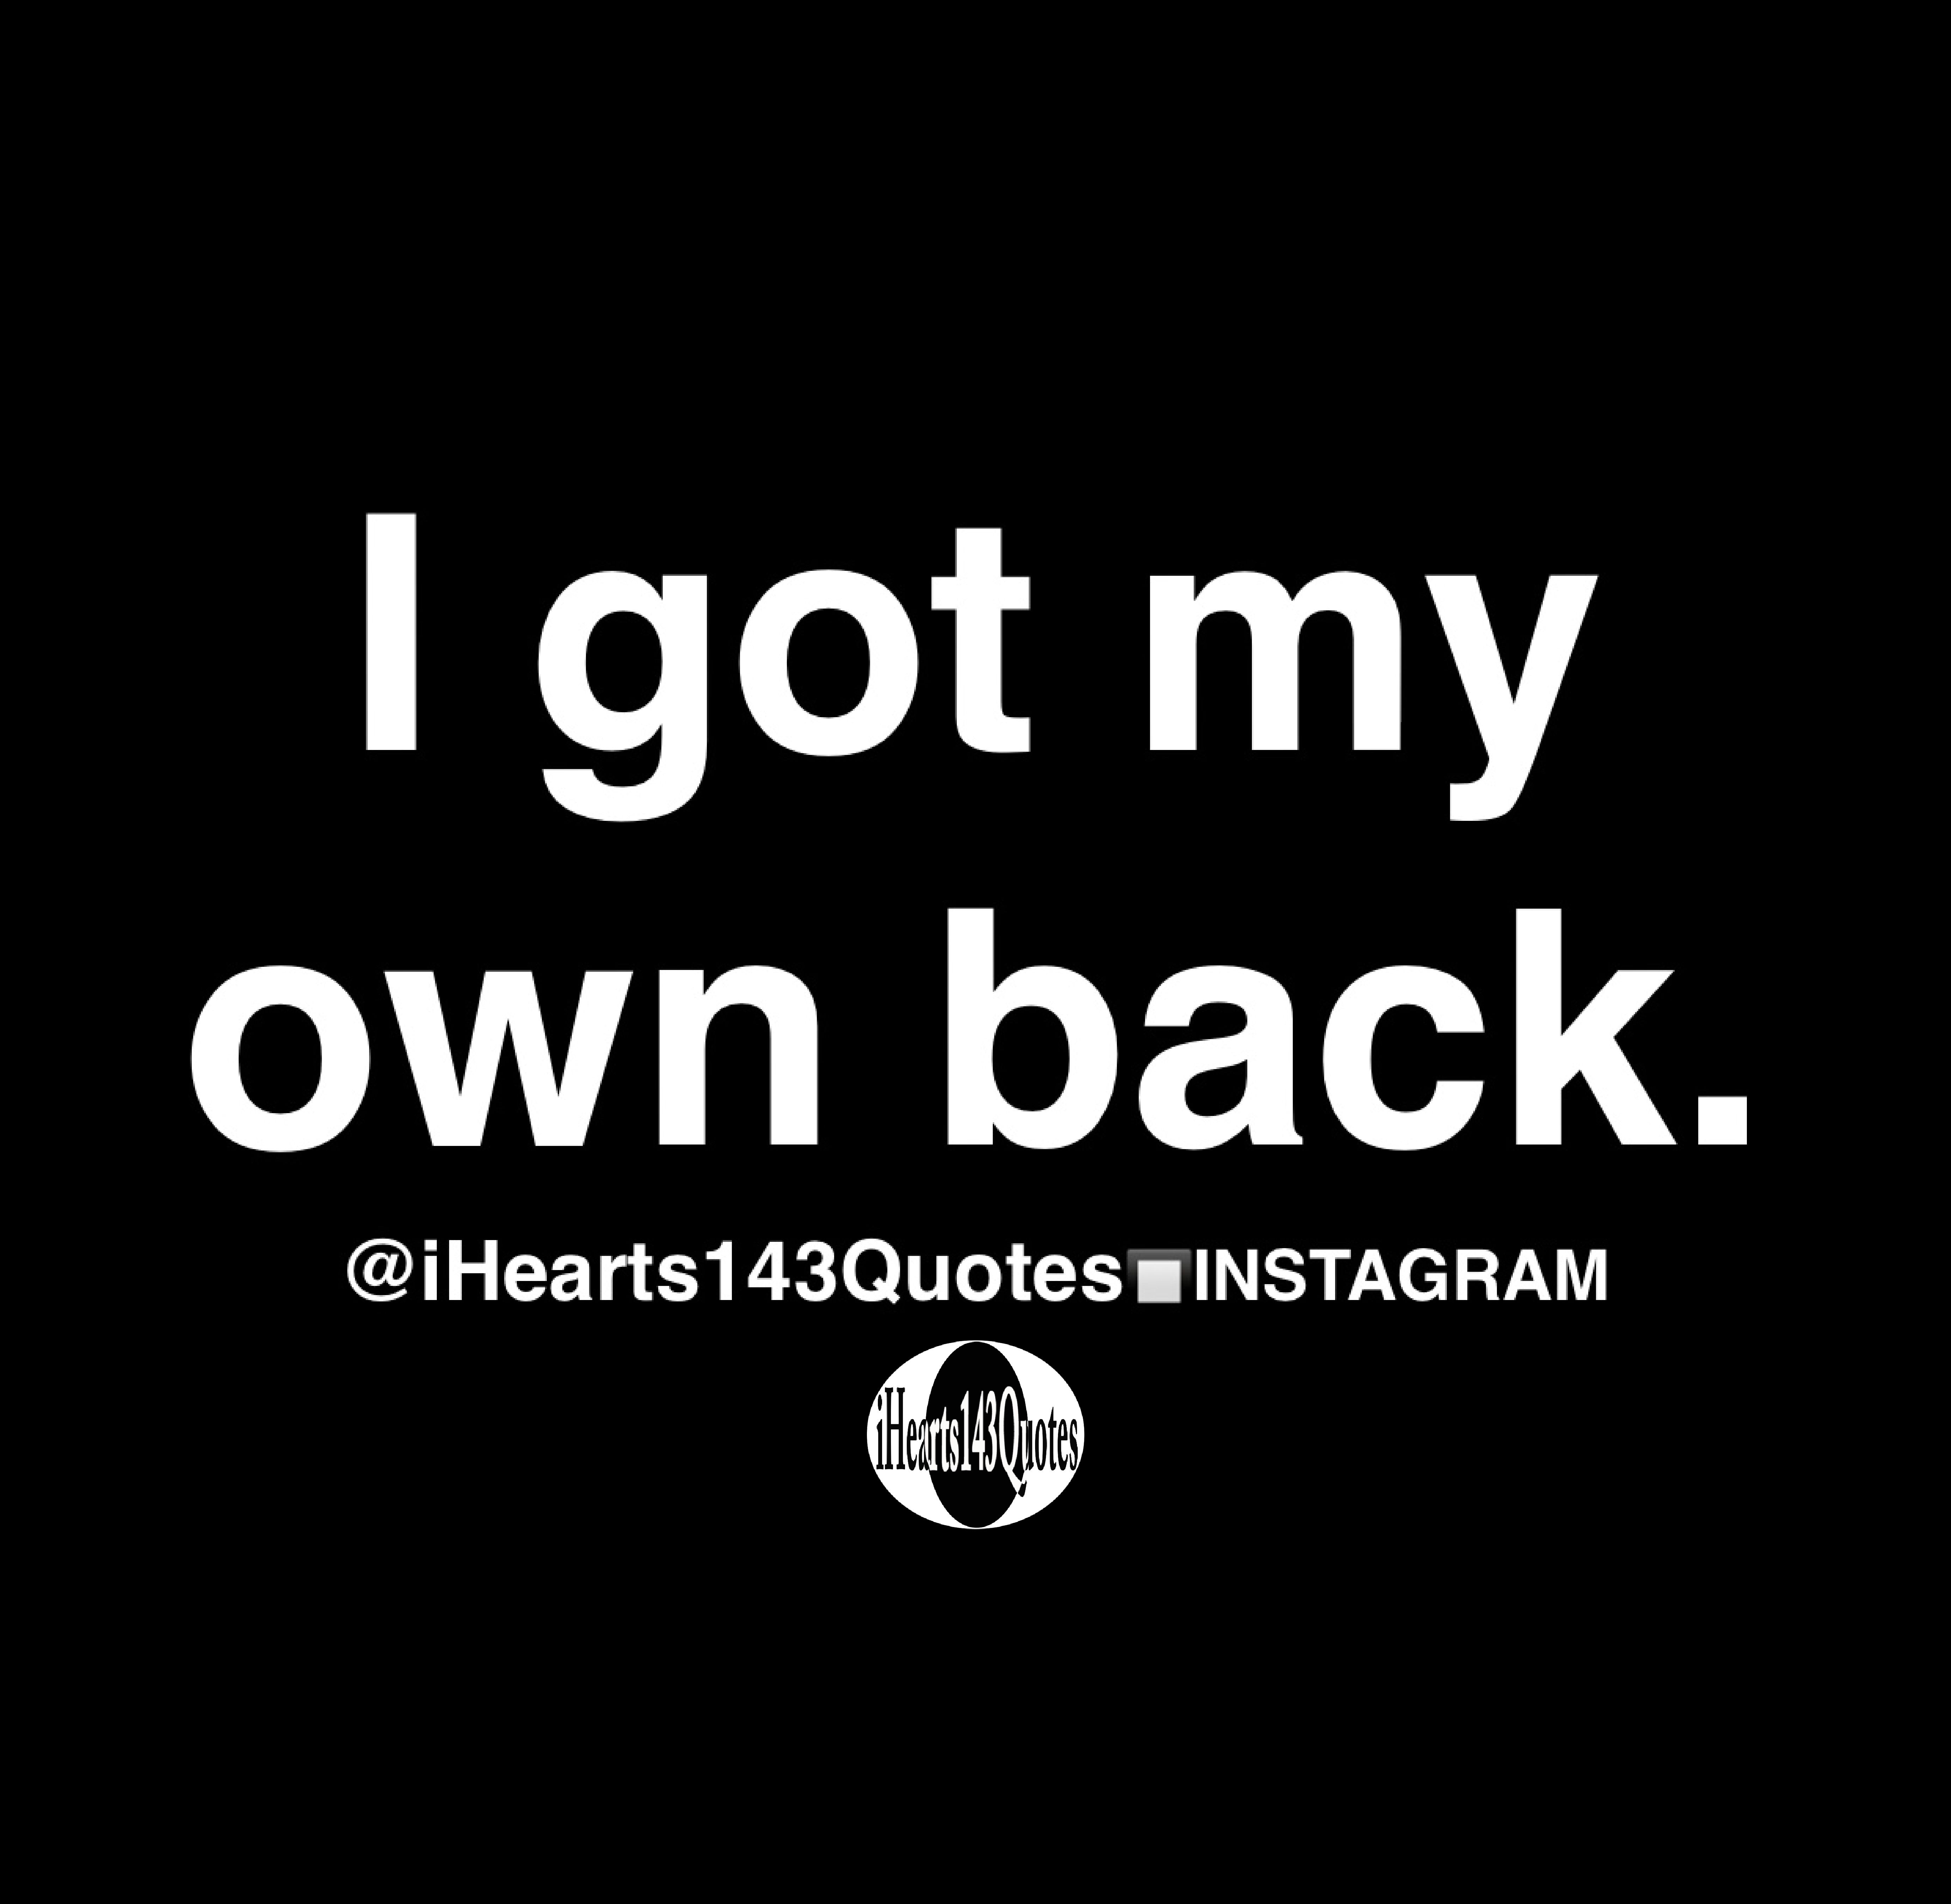 I got my own back - Quotes - iHearts143Quotes